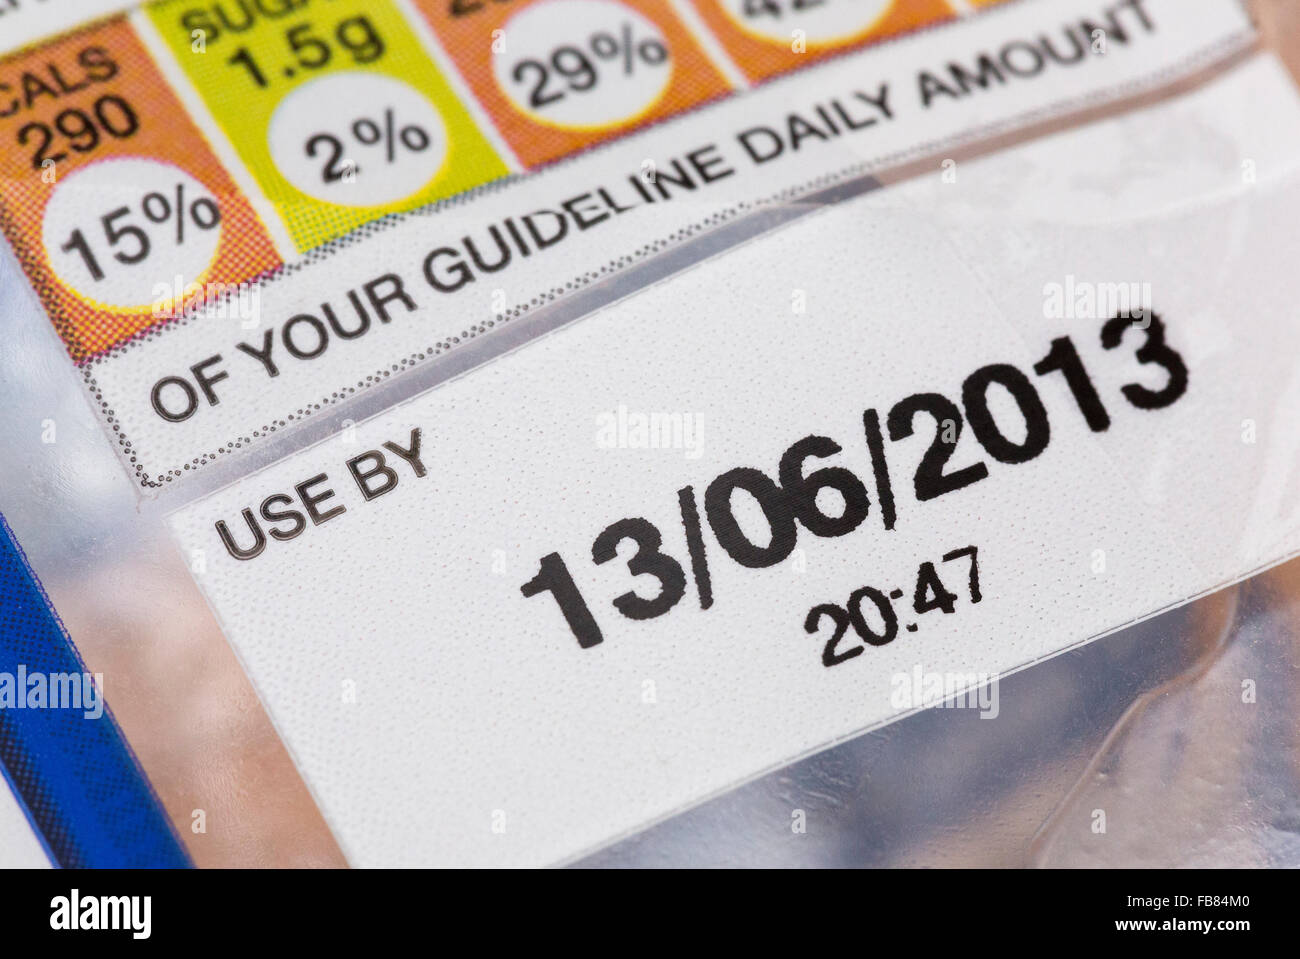 food packaging use by date Stock Photo